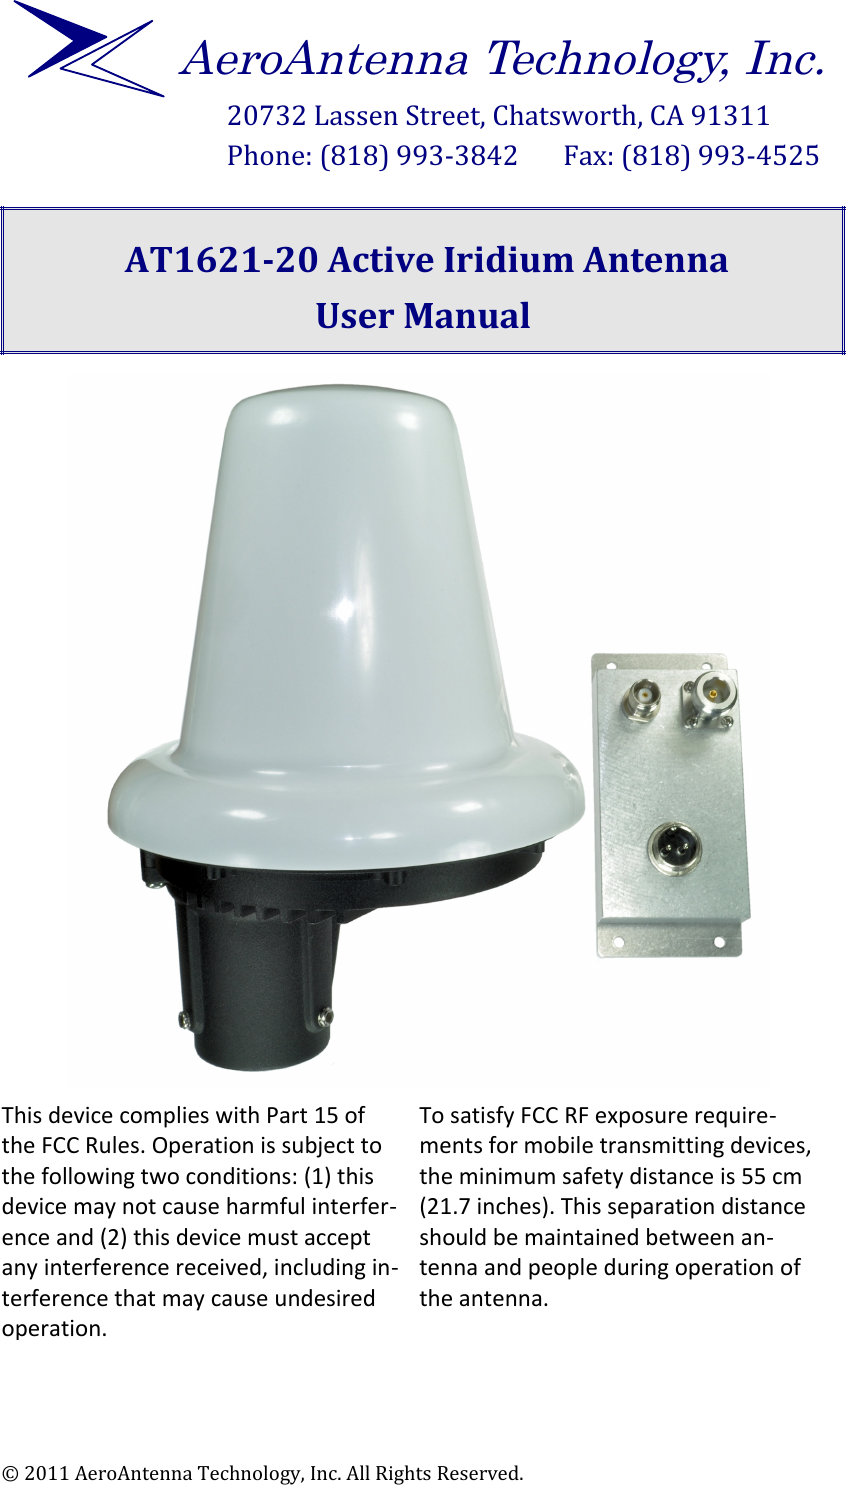 20732 Lassen Street, Chatsworth, CA 91311Phone: (818) 993-3842       Fax: (818) 993-4525  AT1621-20 Active Iridium AntennaUser Manual This device complies with Part 15 of the FCC Rules. Operation is subject to the following two conditions: (1) this device may not cause harmful interfer$ence and (2) this device must accept any interference received, including in$terference that may cause undesired operation. To satisfy FCC RF exposure require$ments for mobile transmitting devices, the minimum safety distance is 55 cm (21.7 inches). This separation distance should be maintained between an$tenna and people during operation of the antenna. © 2011 AeroAntenna Technology, Inc. All Rights Reserved.AeroAntenna Technology, Inc.